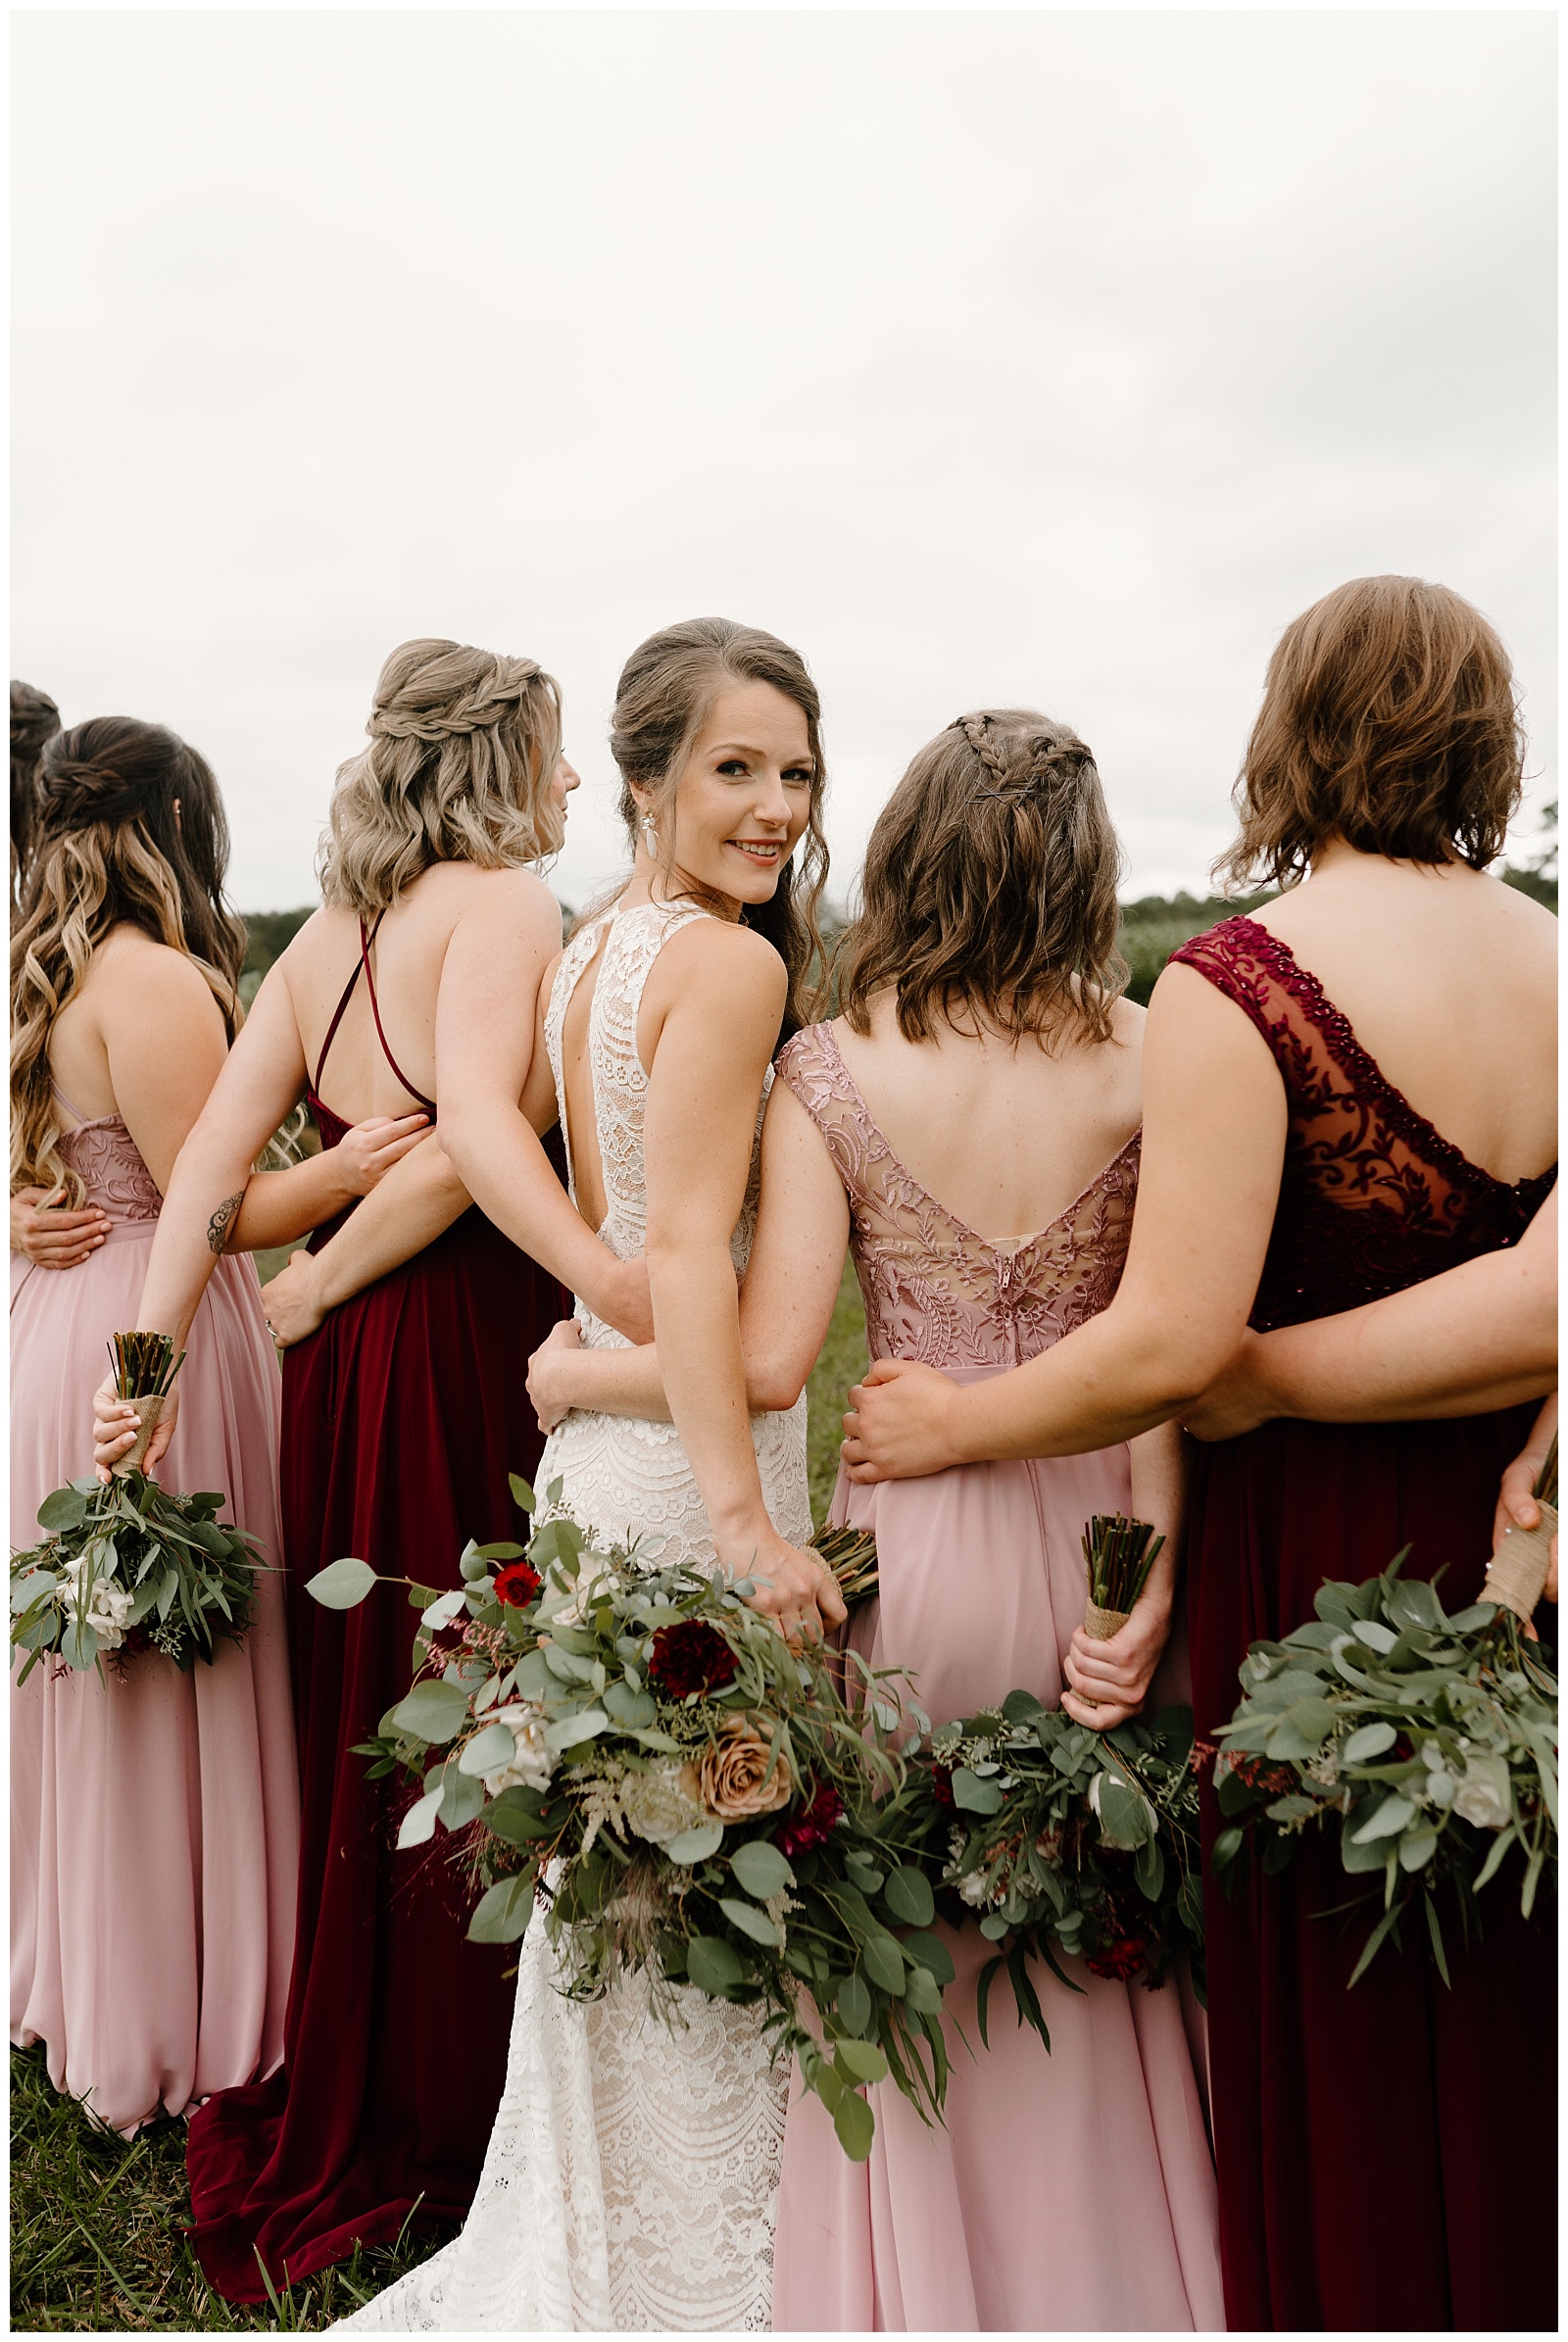 Bridesmaids turn around to show off the details on their low cut back dresses. The bride is turned around looking over her shoulder at the camera.